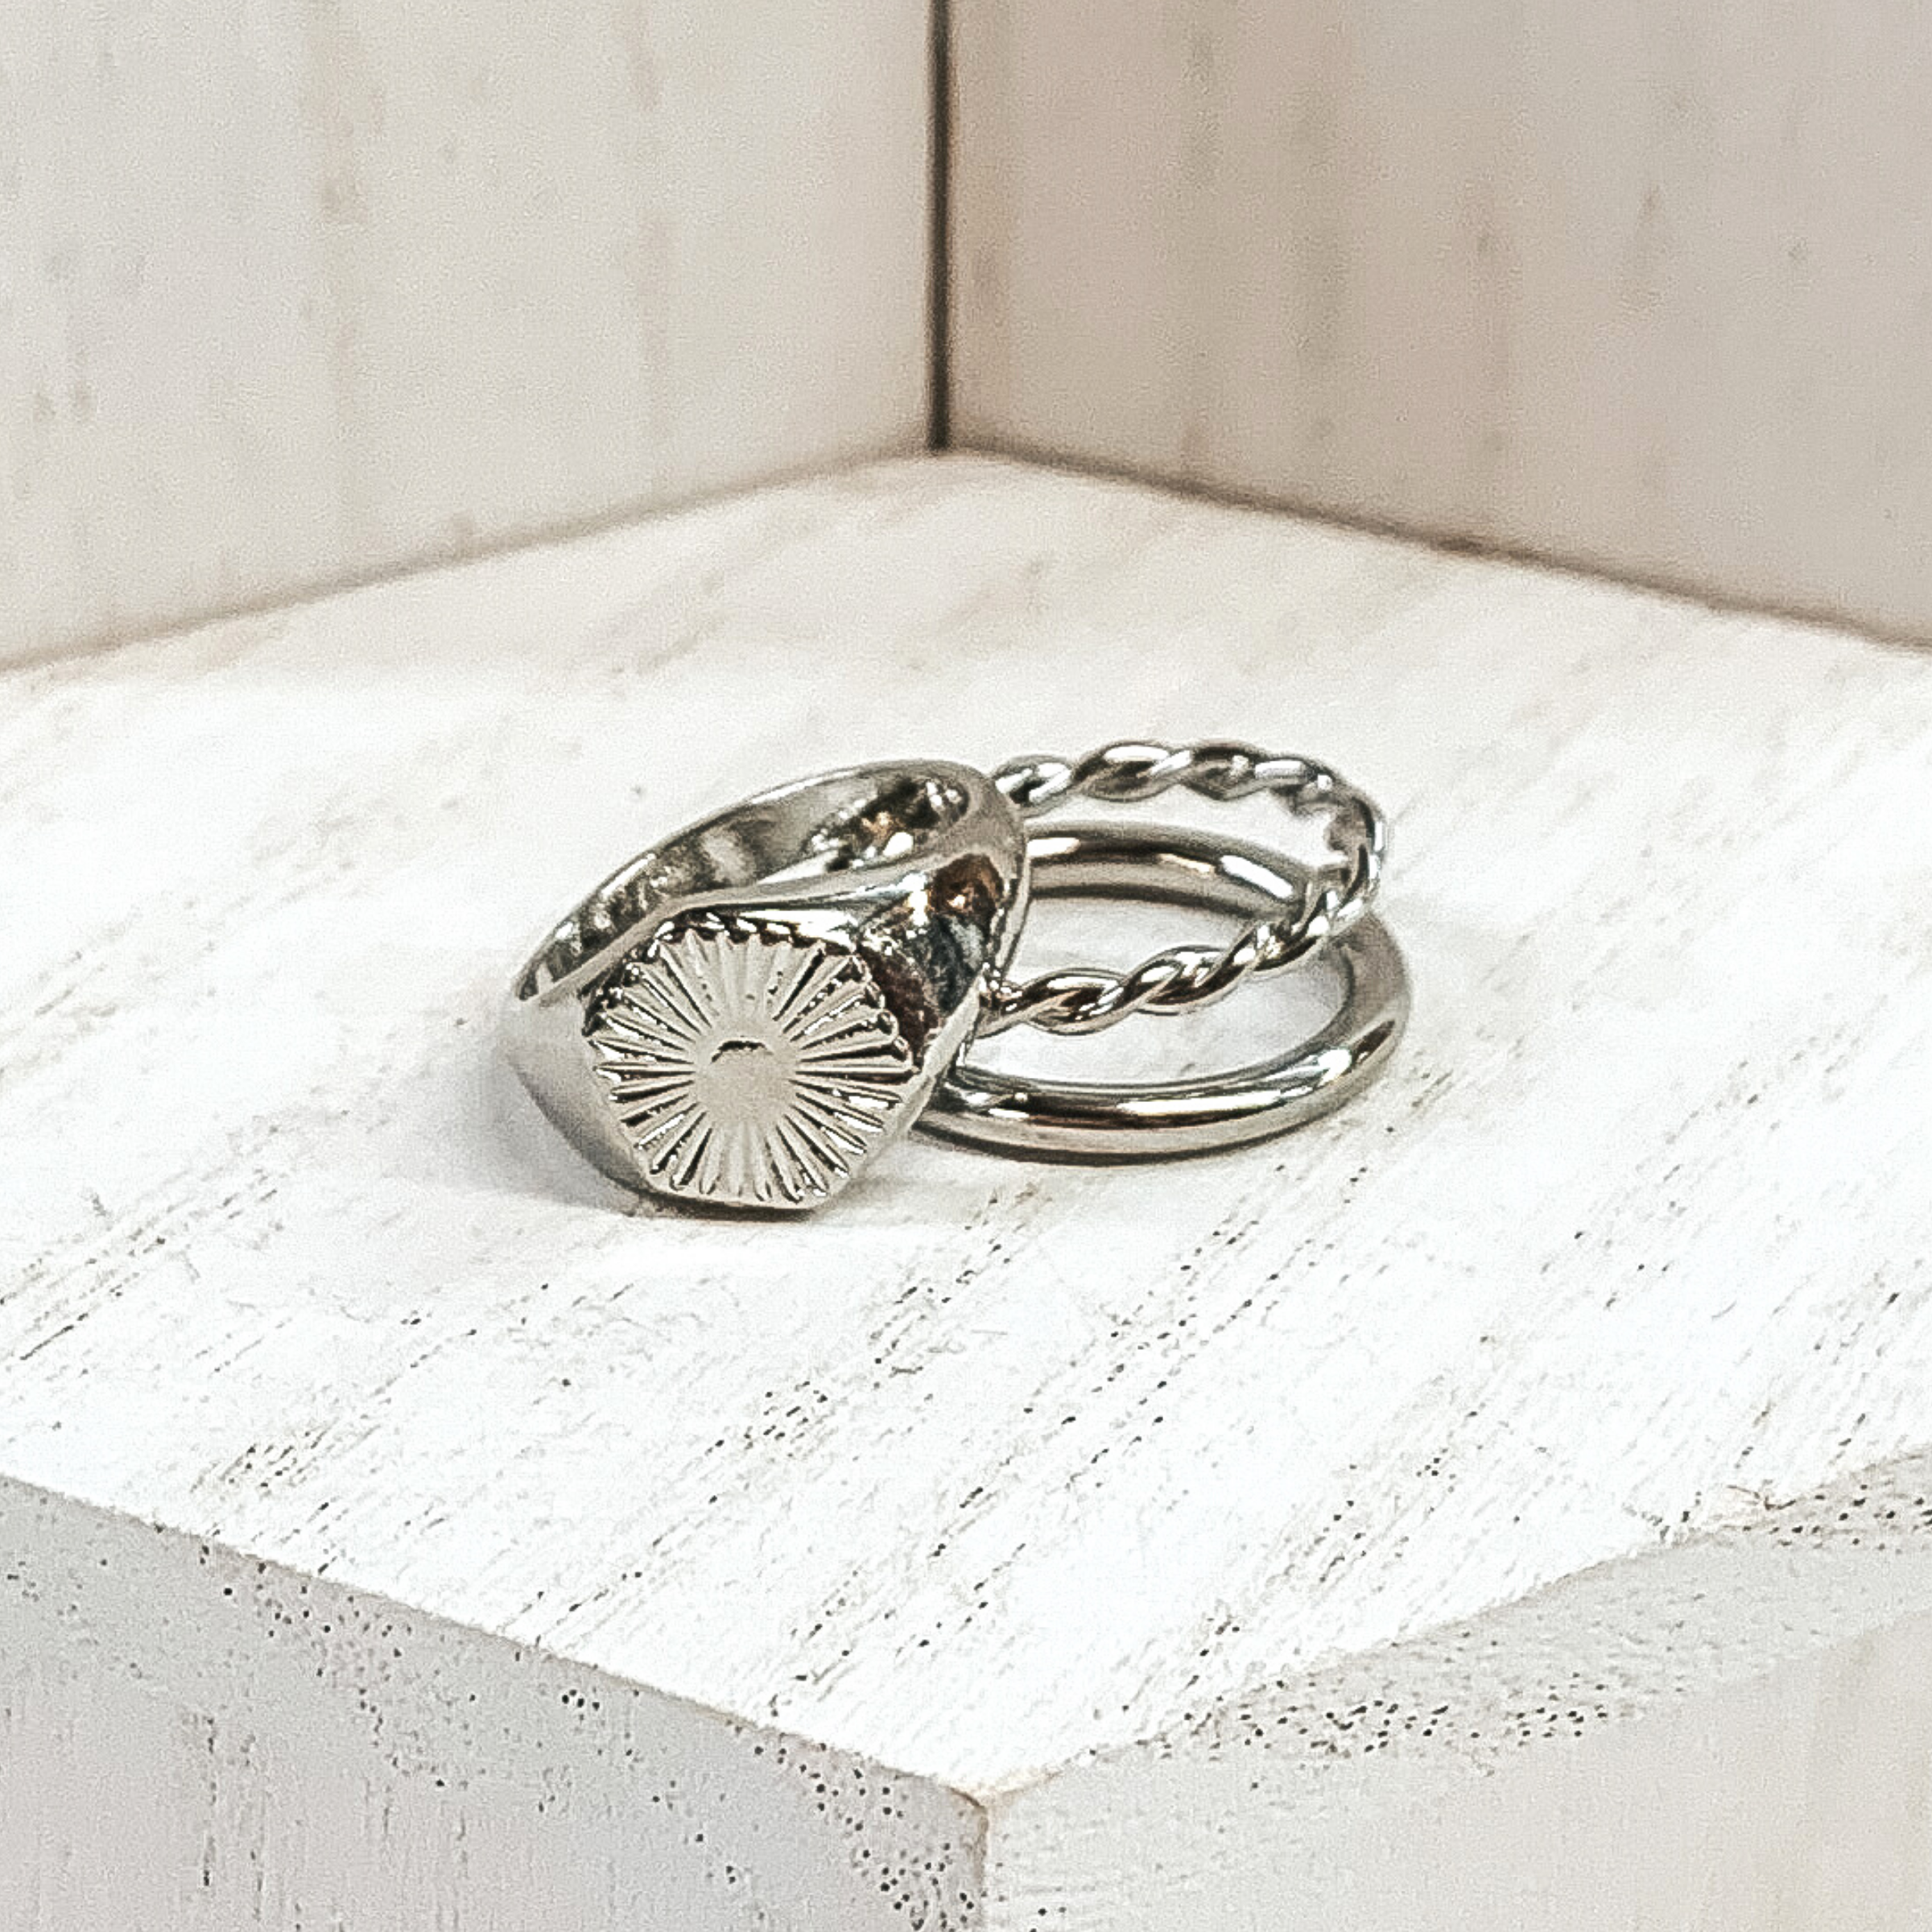 Both rings are silver in color. The double ring has one plain band and one twisted band. The ring that is leaning on it has a hexagon pendant with a starburst design on it. These rings are pictured on a white background.